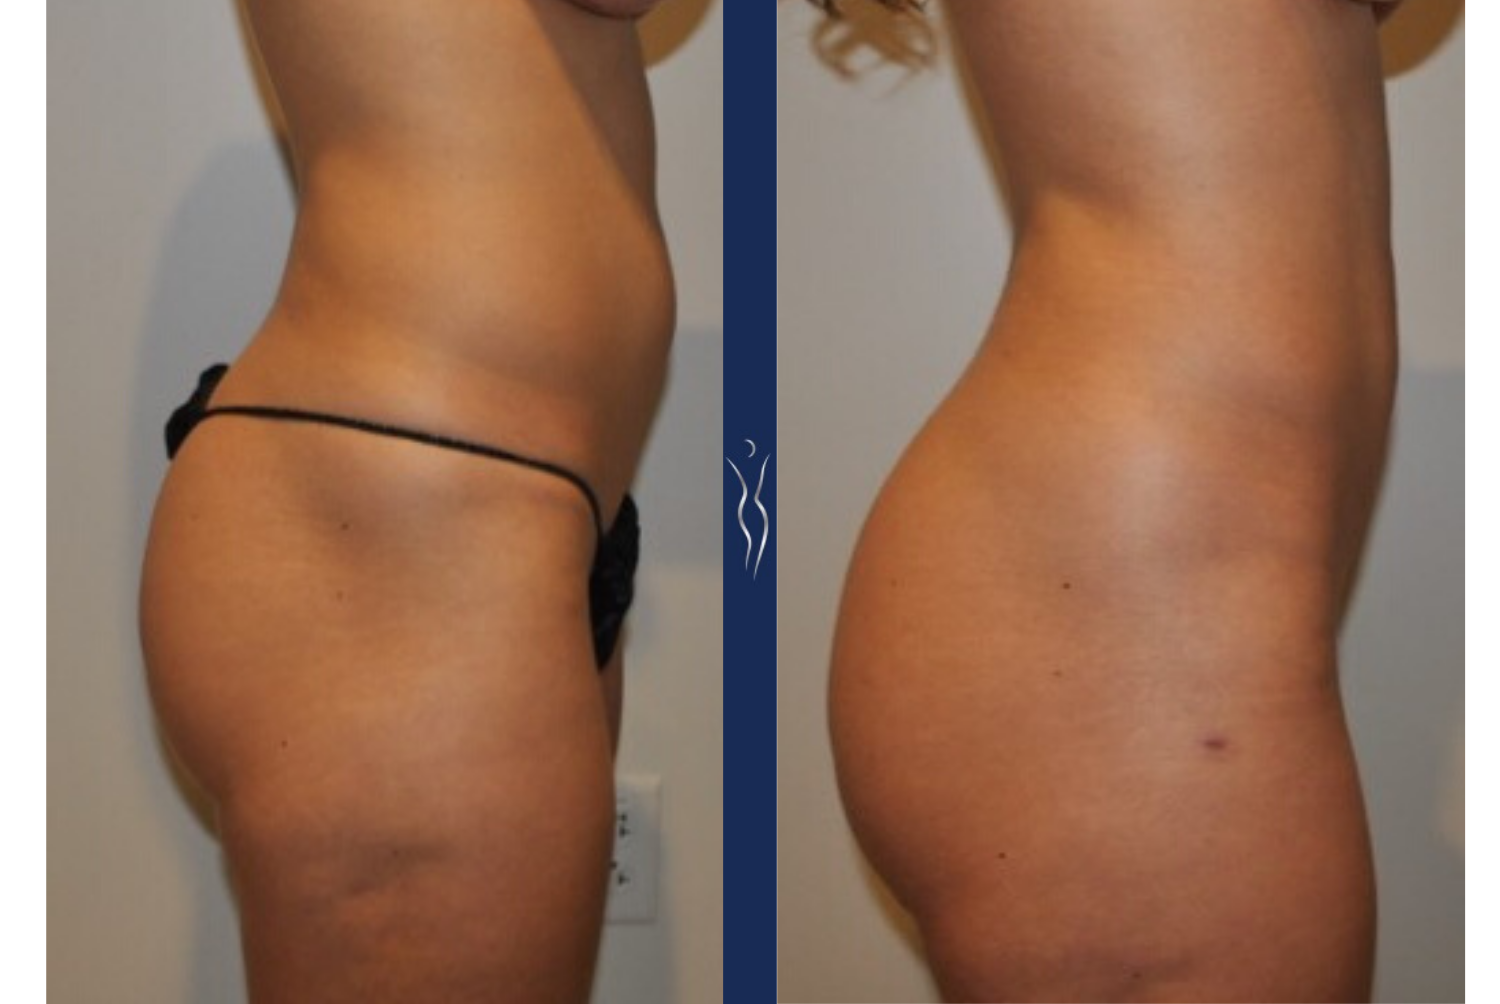 27 year old caucasian lady VASER liposuction and Renuvion with Brazilian Butt Lift right lateral-1